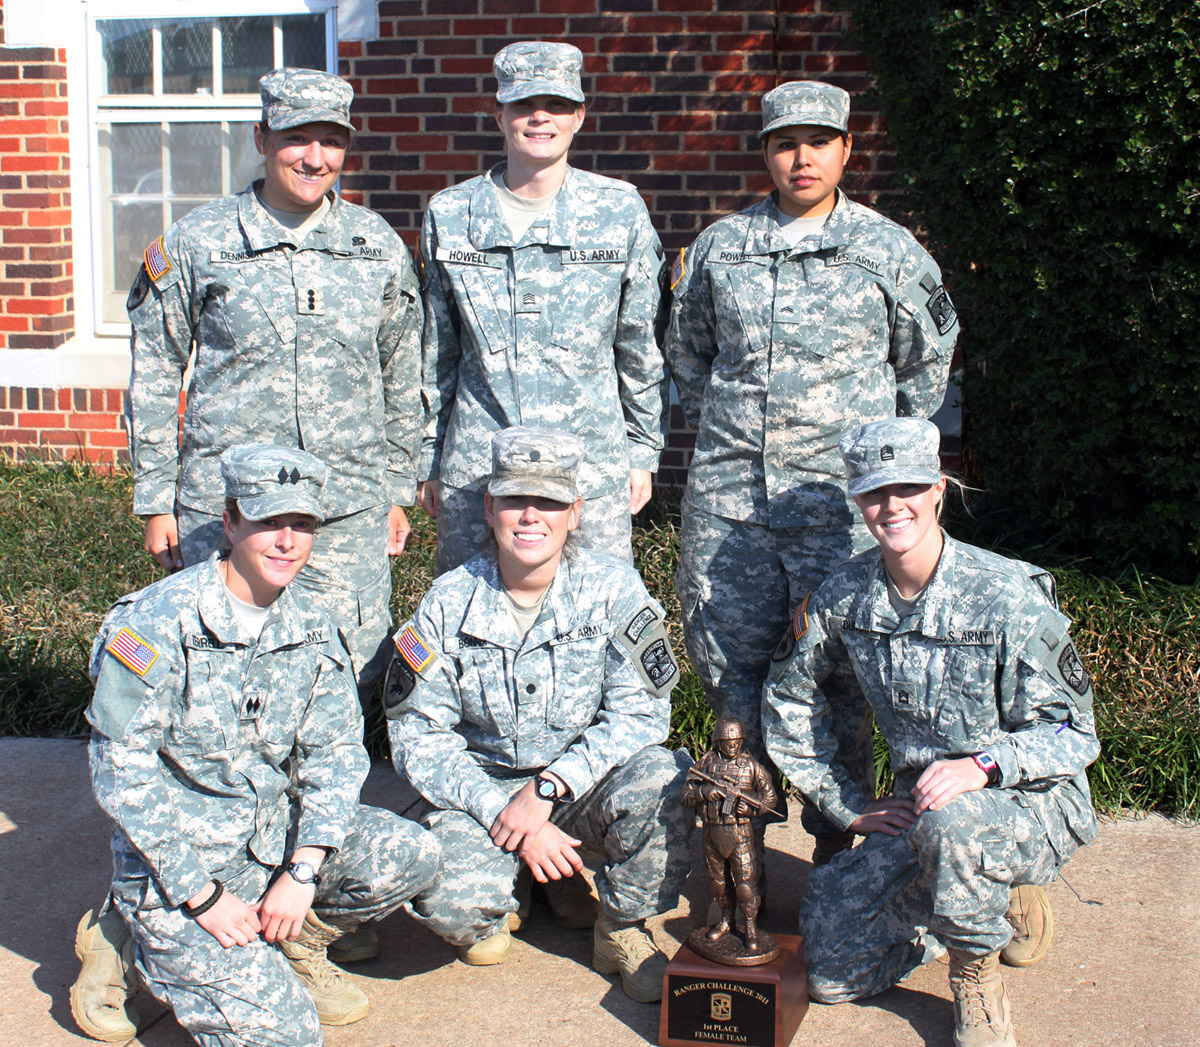 The Oklahoma State University ROTC female team members (front row, left to right) Cathy Terrell, Emily Bonner, Magen Duncan, (back row, left to right) Sharon Dennison, Alicia Howell, Korrie Powell, not pictured Kelsea Schultz placed first place overall in the annual Ranger Challenge Competition held recently at Camp Gruber near Muskogee. The competition included eight other schools from Oklahoma and Arkansas. The OSU male team placed third overall.